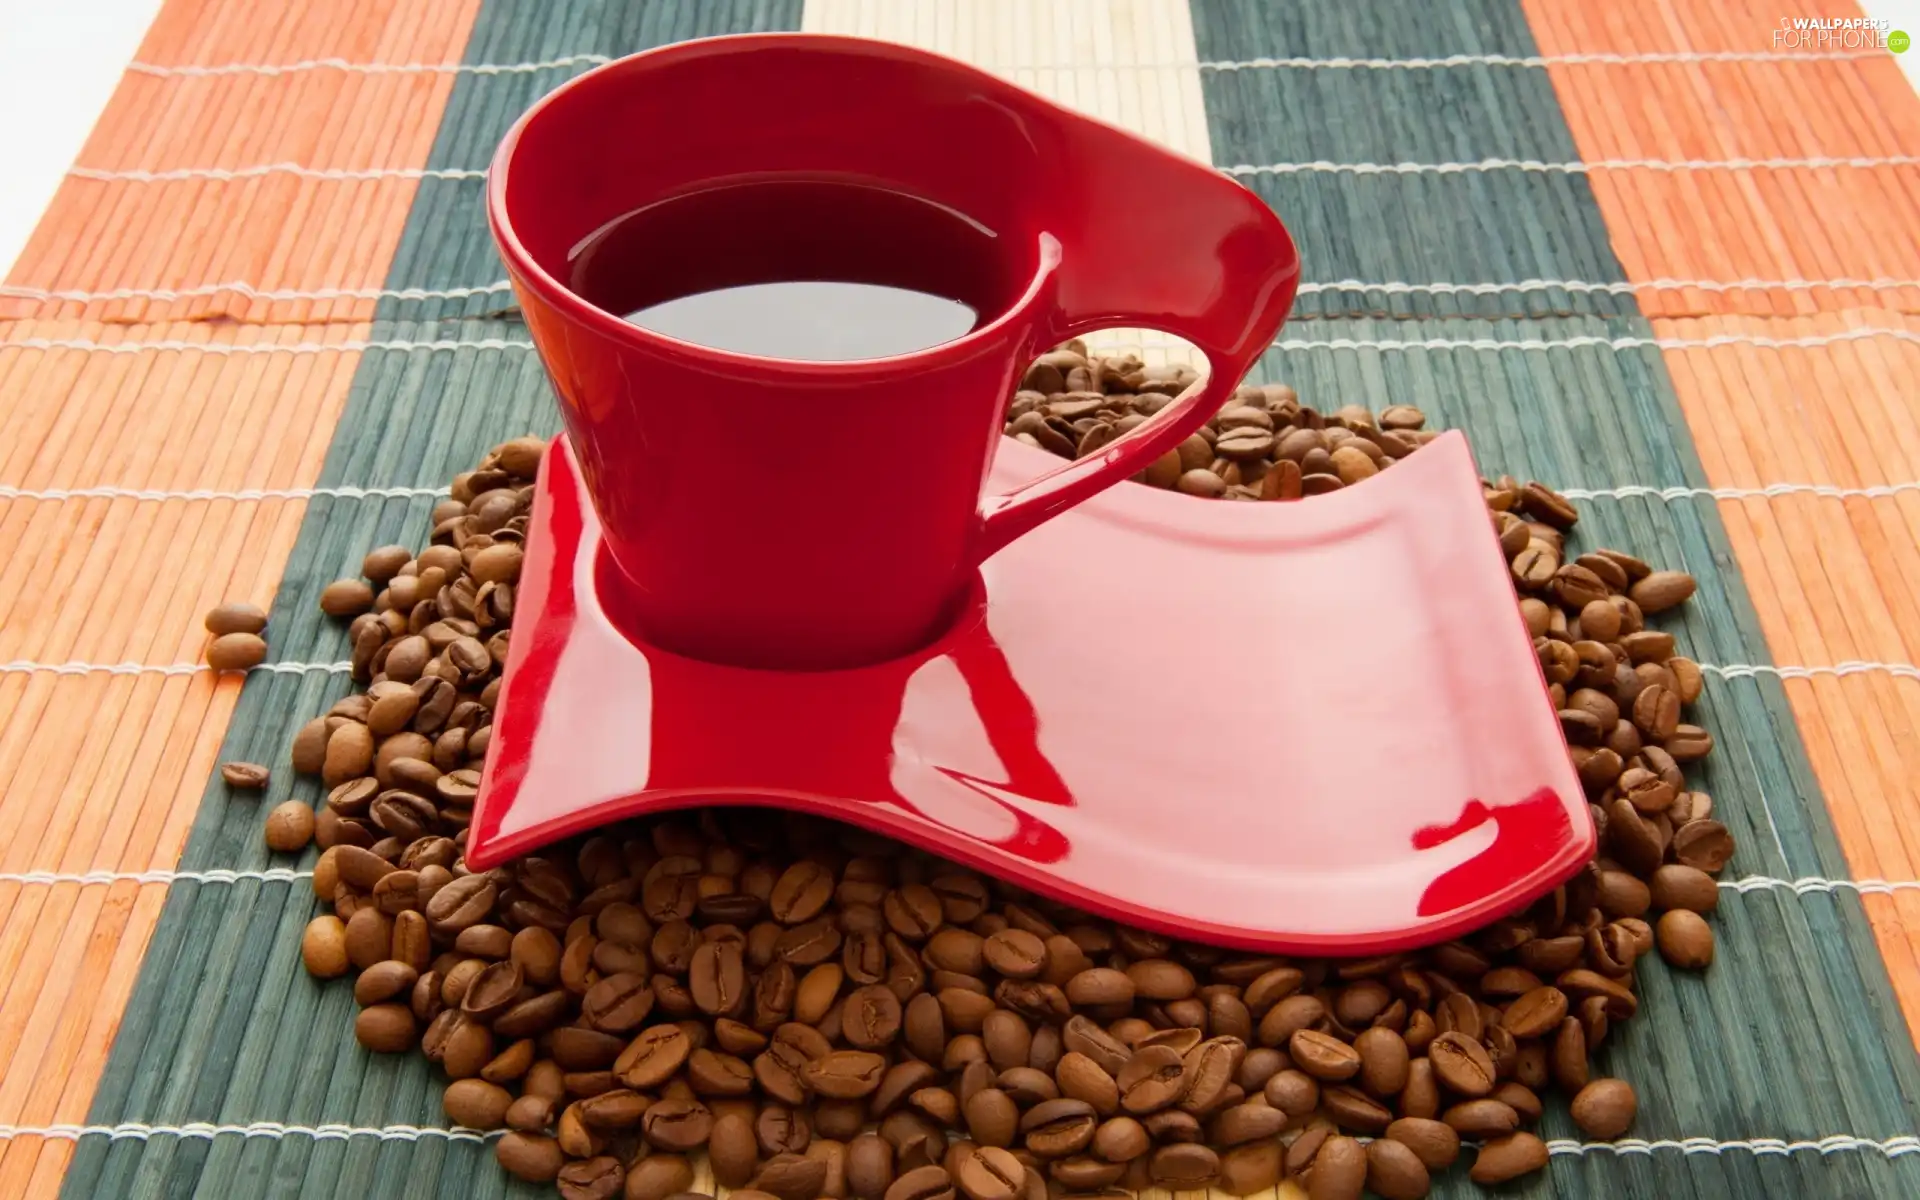 grains, coffee, cup, saucer, red hot